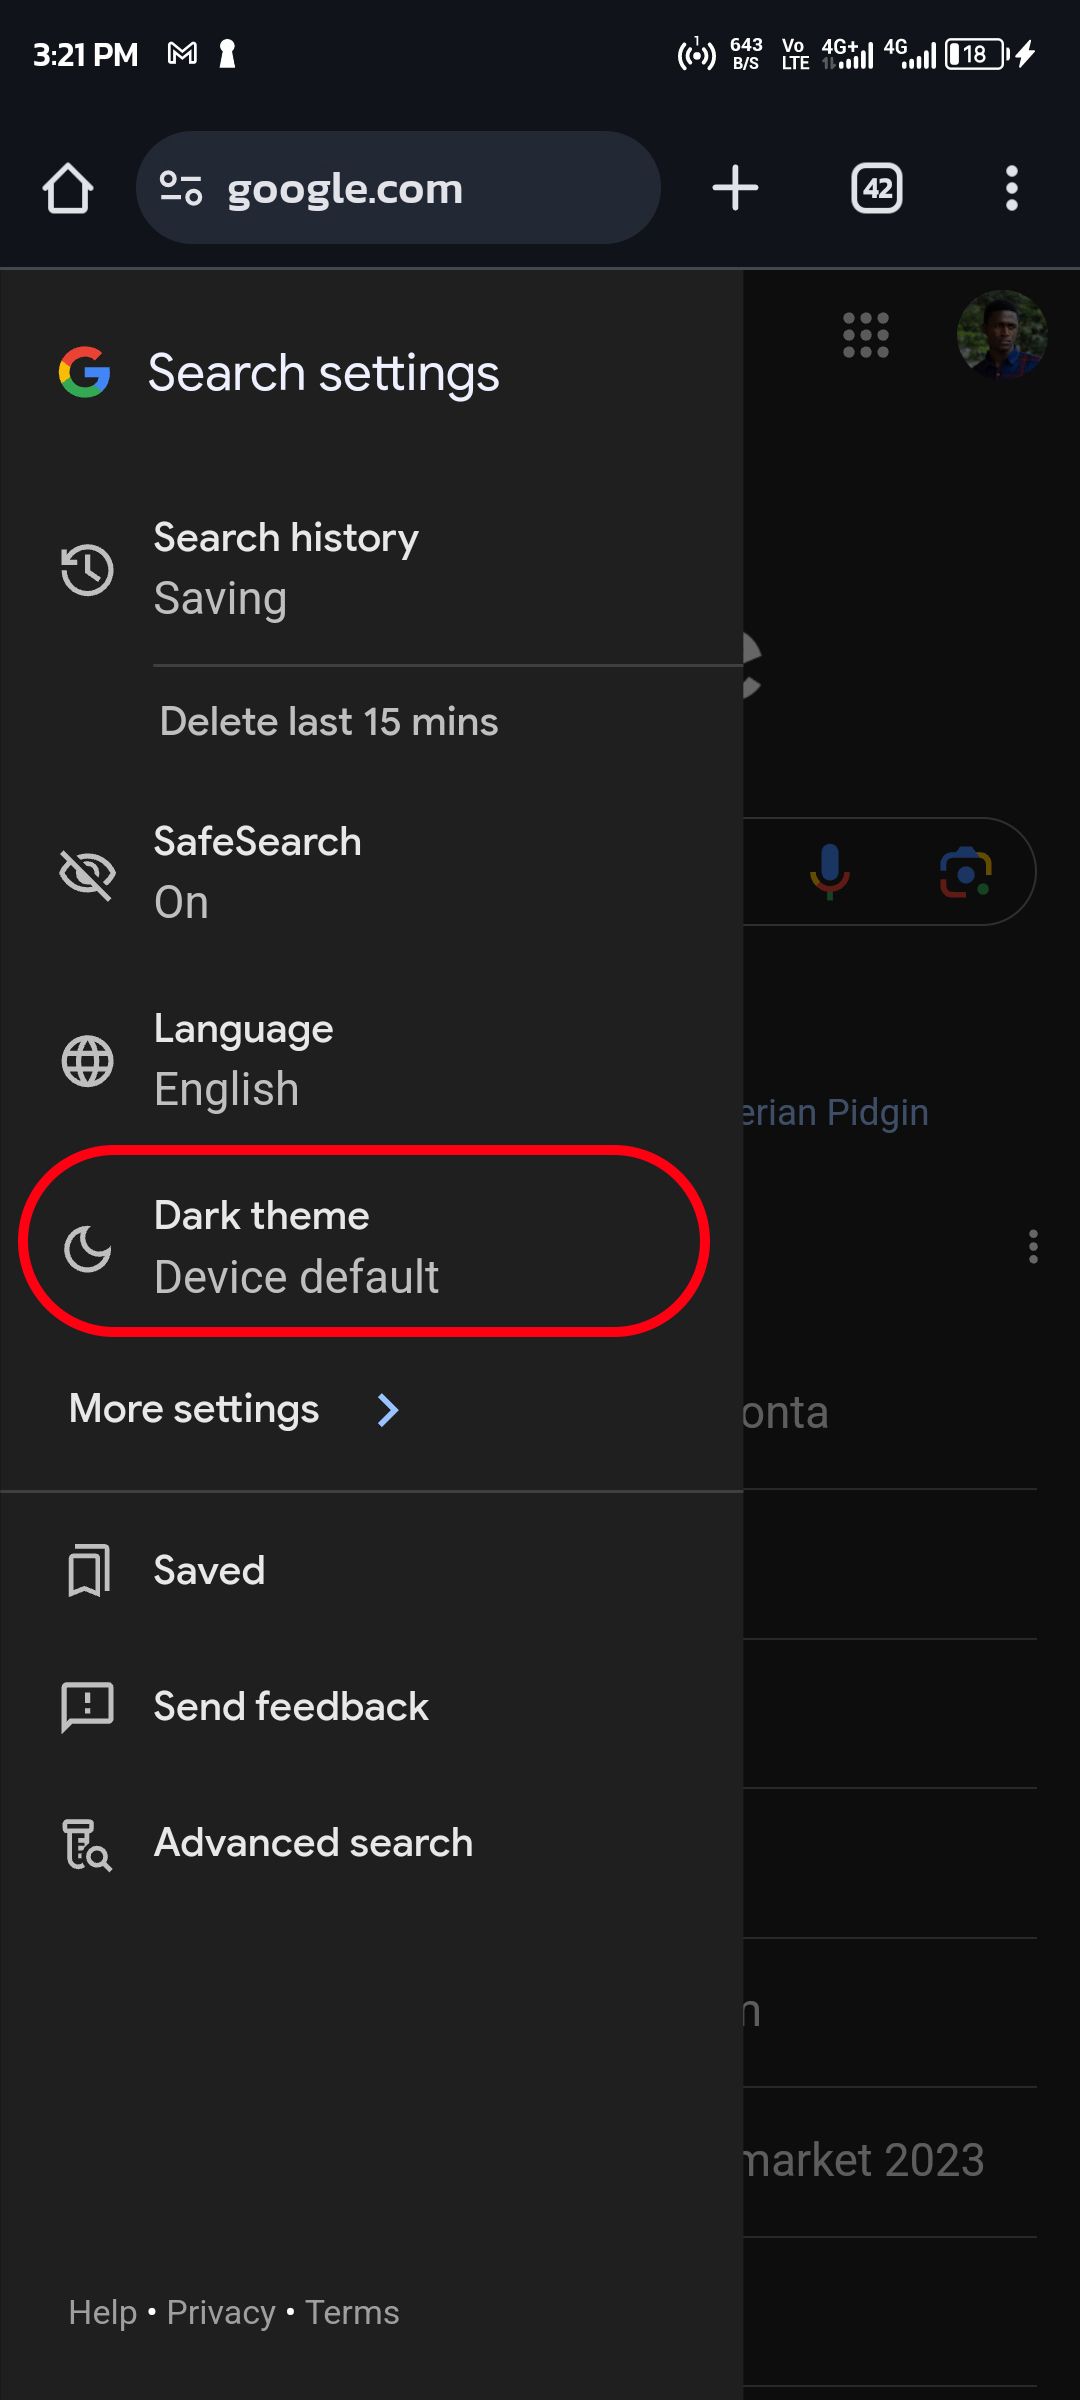 Accessing Google search dark theme settings on mobile 